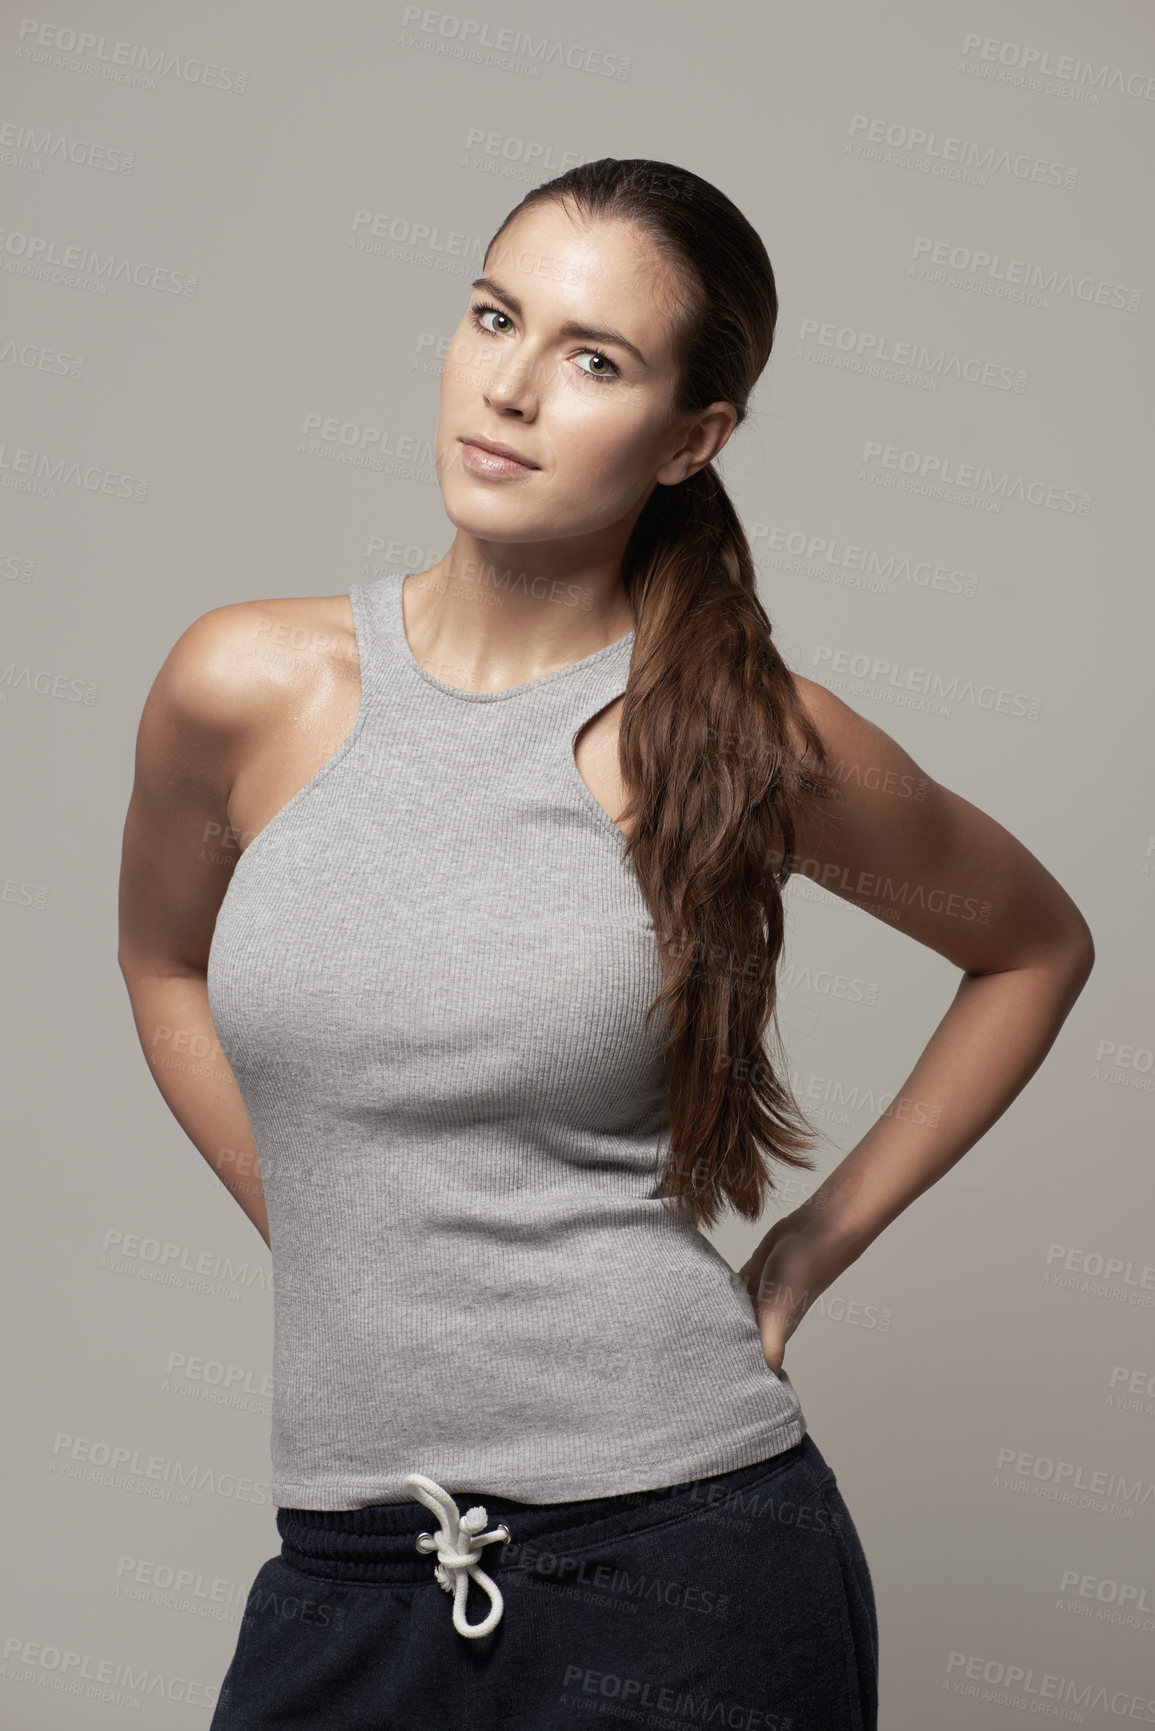 Buy stock photo Studio portrait of a fit young woman in exercise clothing